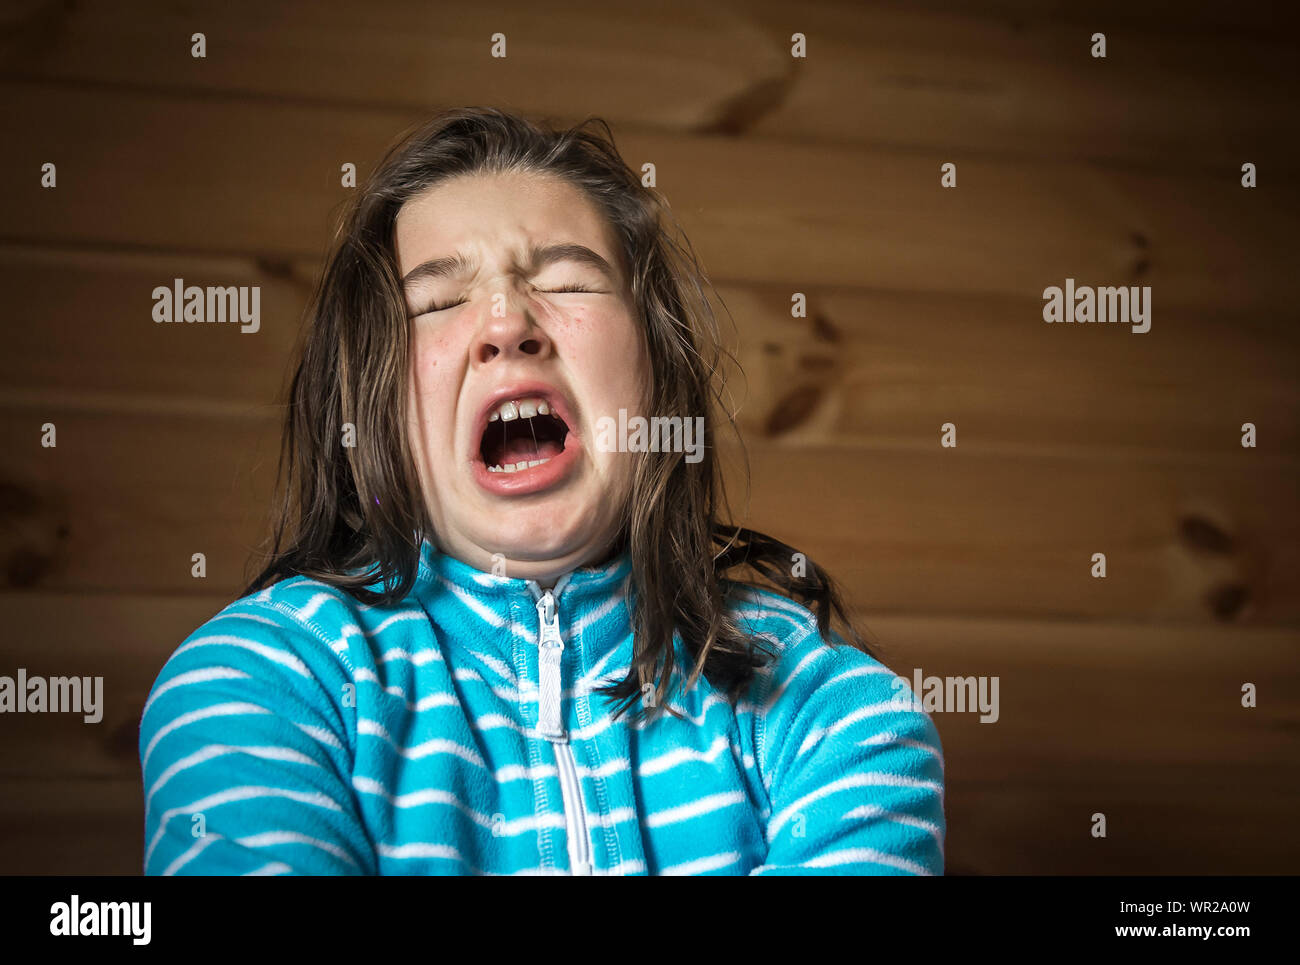 Angry Girl Shouting Against Wooden Wall Stock Photo